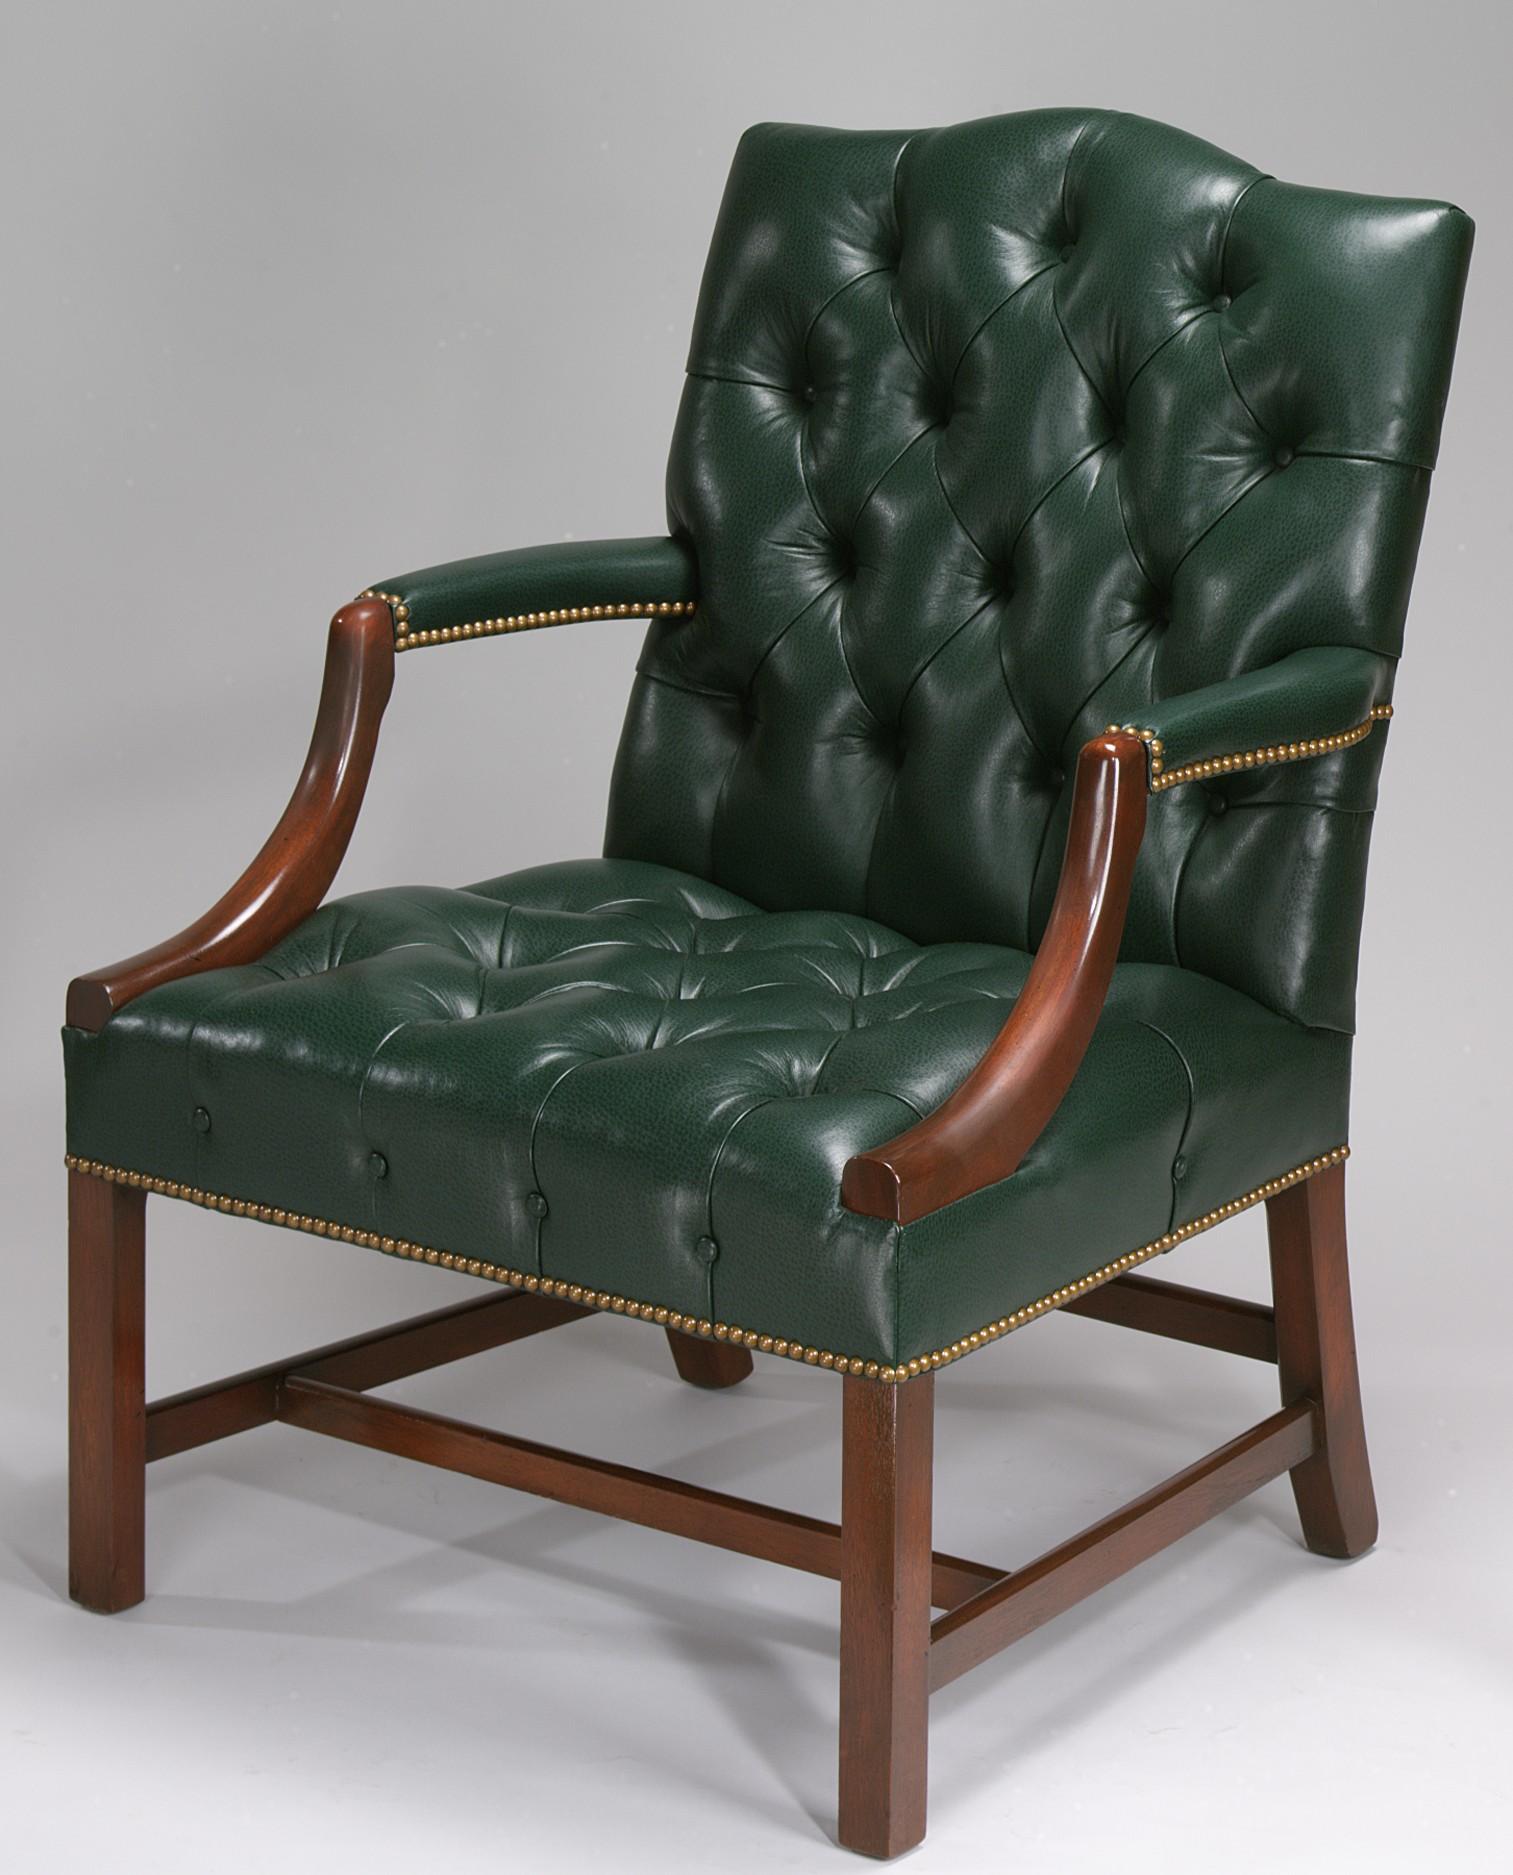 American Mahogany Leather Gainsborough Style Armchair w/ Diamond Tufted Seat & Back For Sale